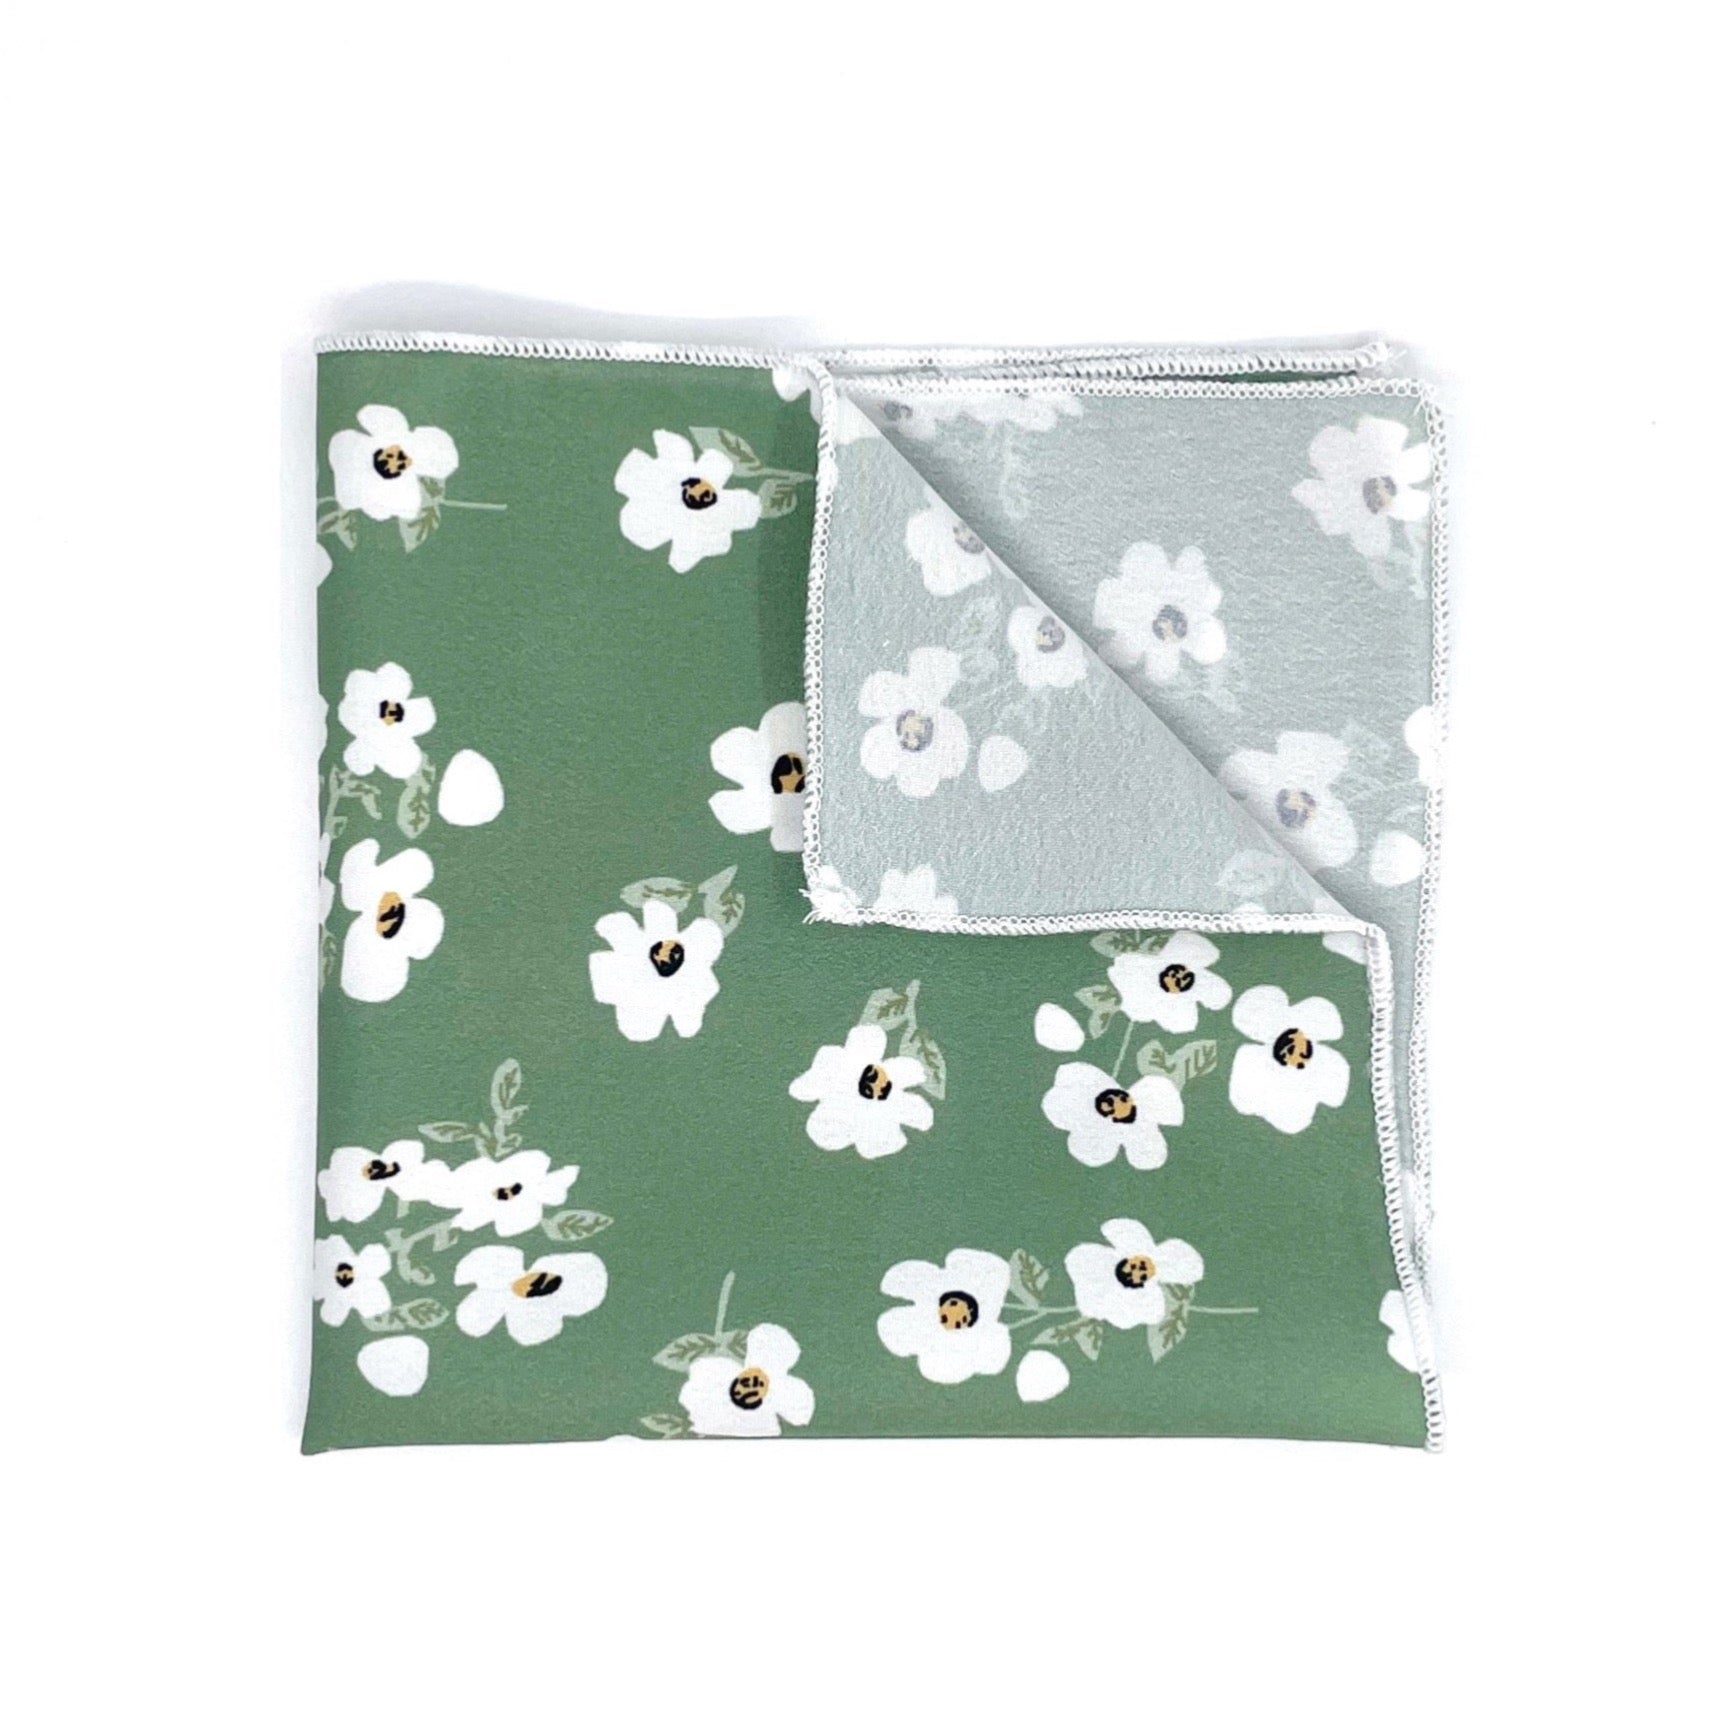 Sage Green Floral Pocket Square AUGUST Mytieshop Sage Green Floral Pocket square Color: Green Item Length: 23 cm ( 9 inches)Item Width : 22 cm (8.6 inches) Matching Necktie Add a touch of elegance to your look with this AUGUST Floral Pocket Square. Made with high-quality fabric, as a result this pocket square is perfect for any formal occasion. The beautiful floral design is sure to make you stand out from the crowd, and whether you're attending a wedding, a job interview, or a fancy dinner part